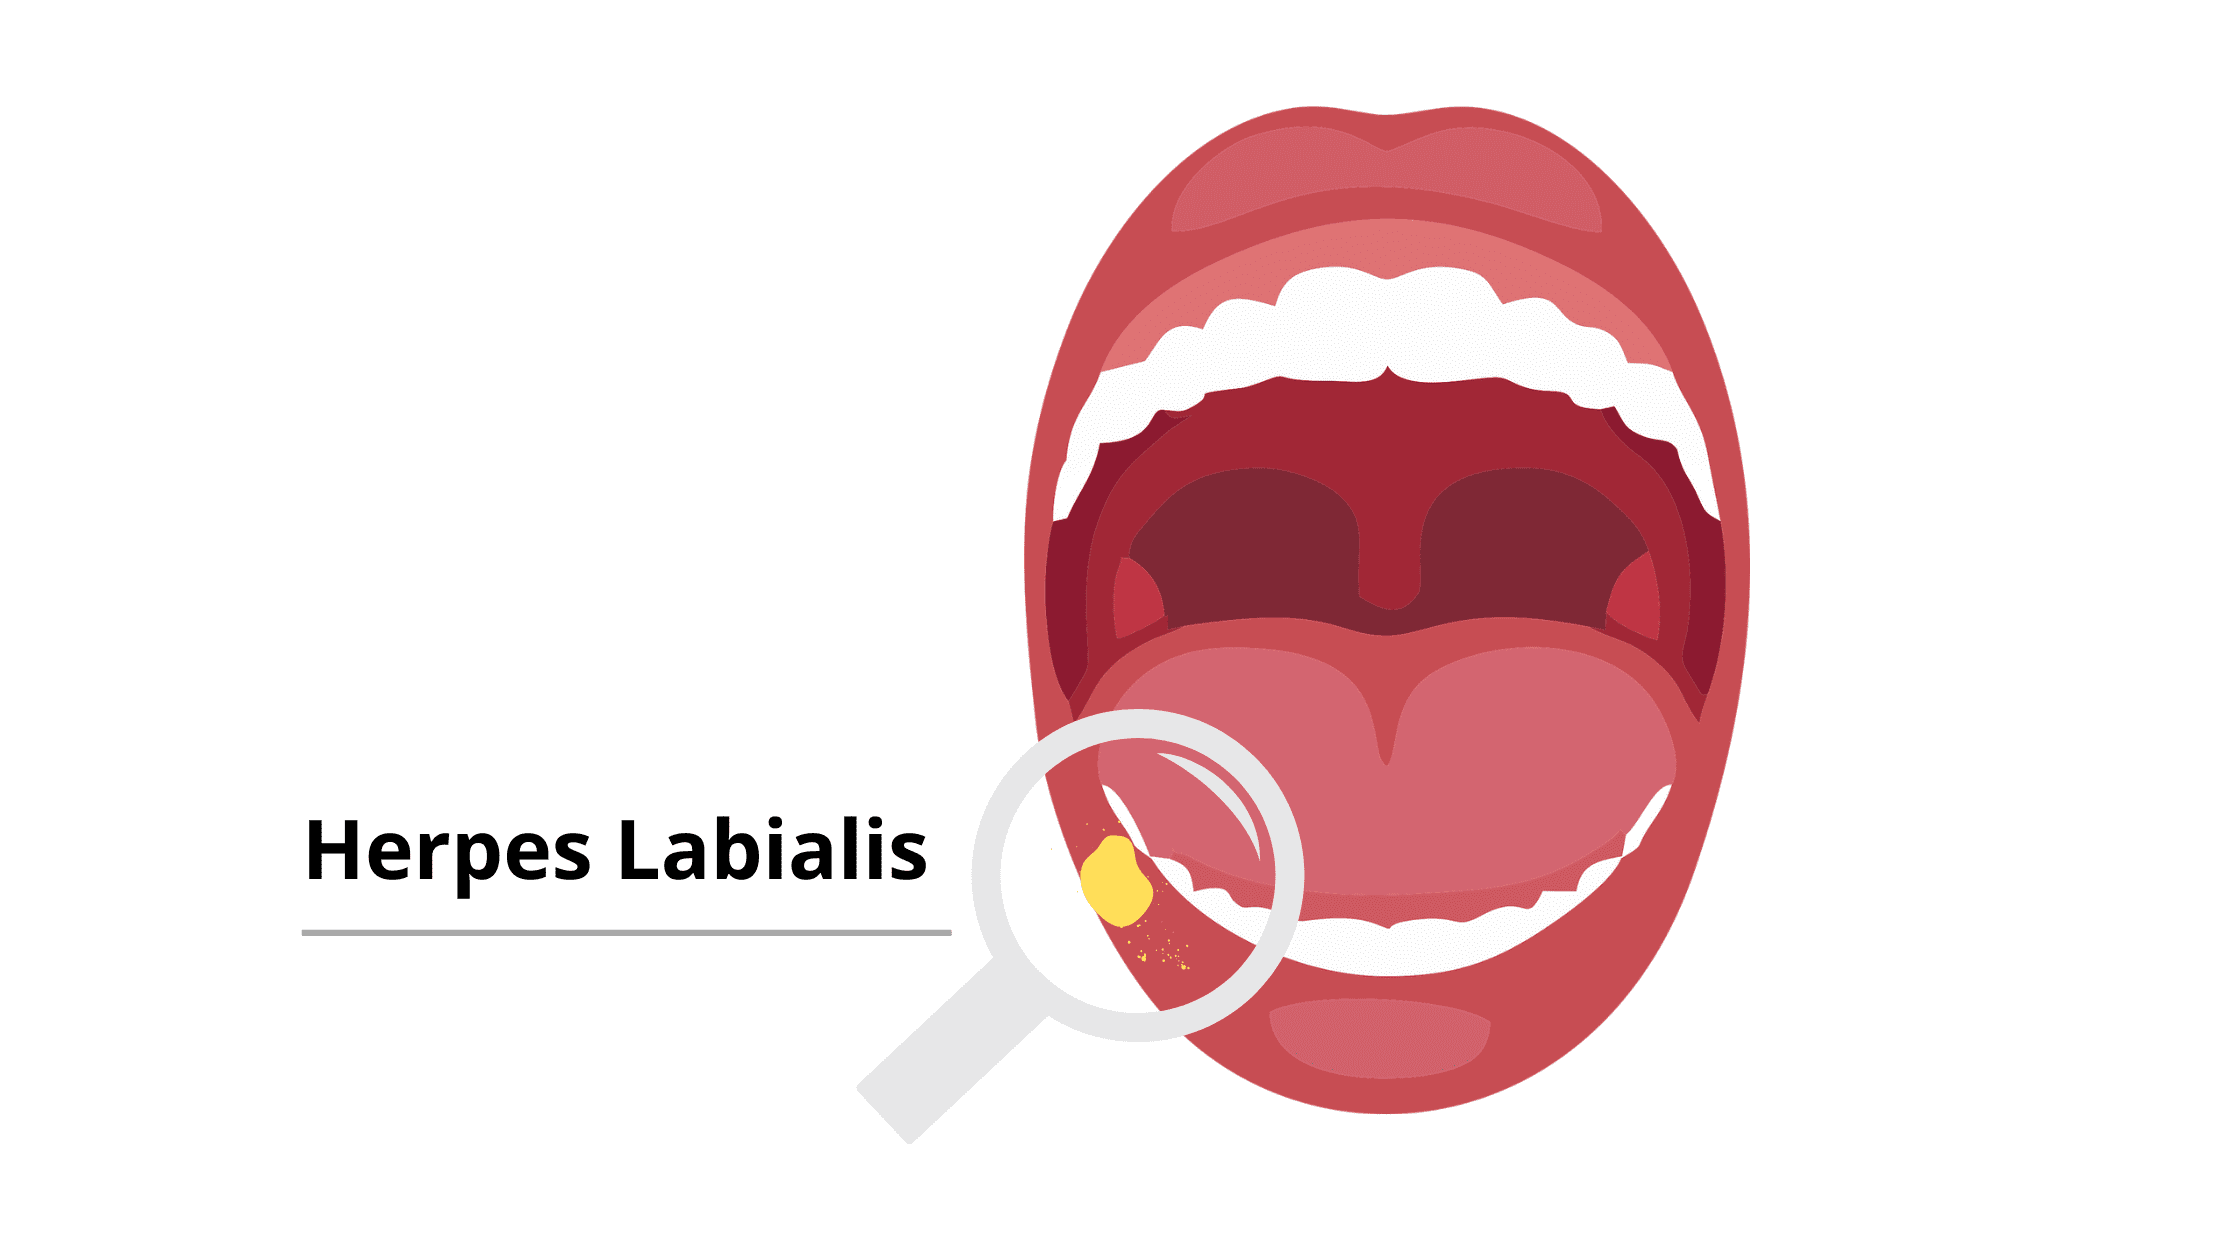 Recurrent herpes simplex infection: Herpes labialis